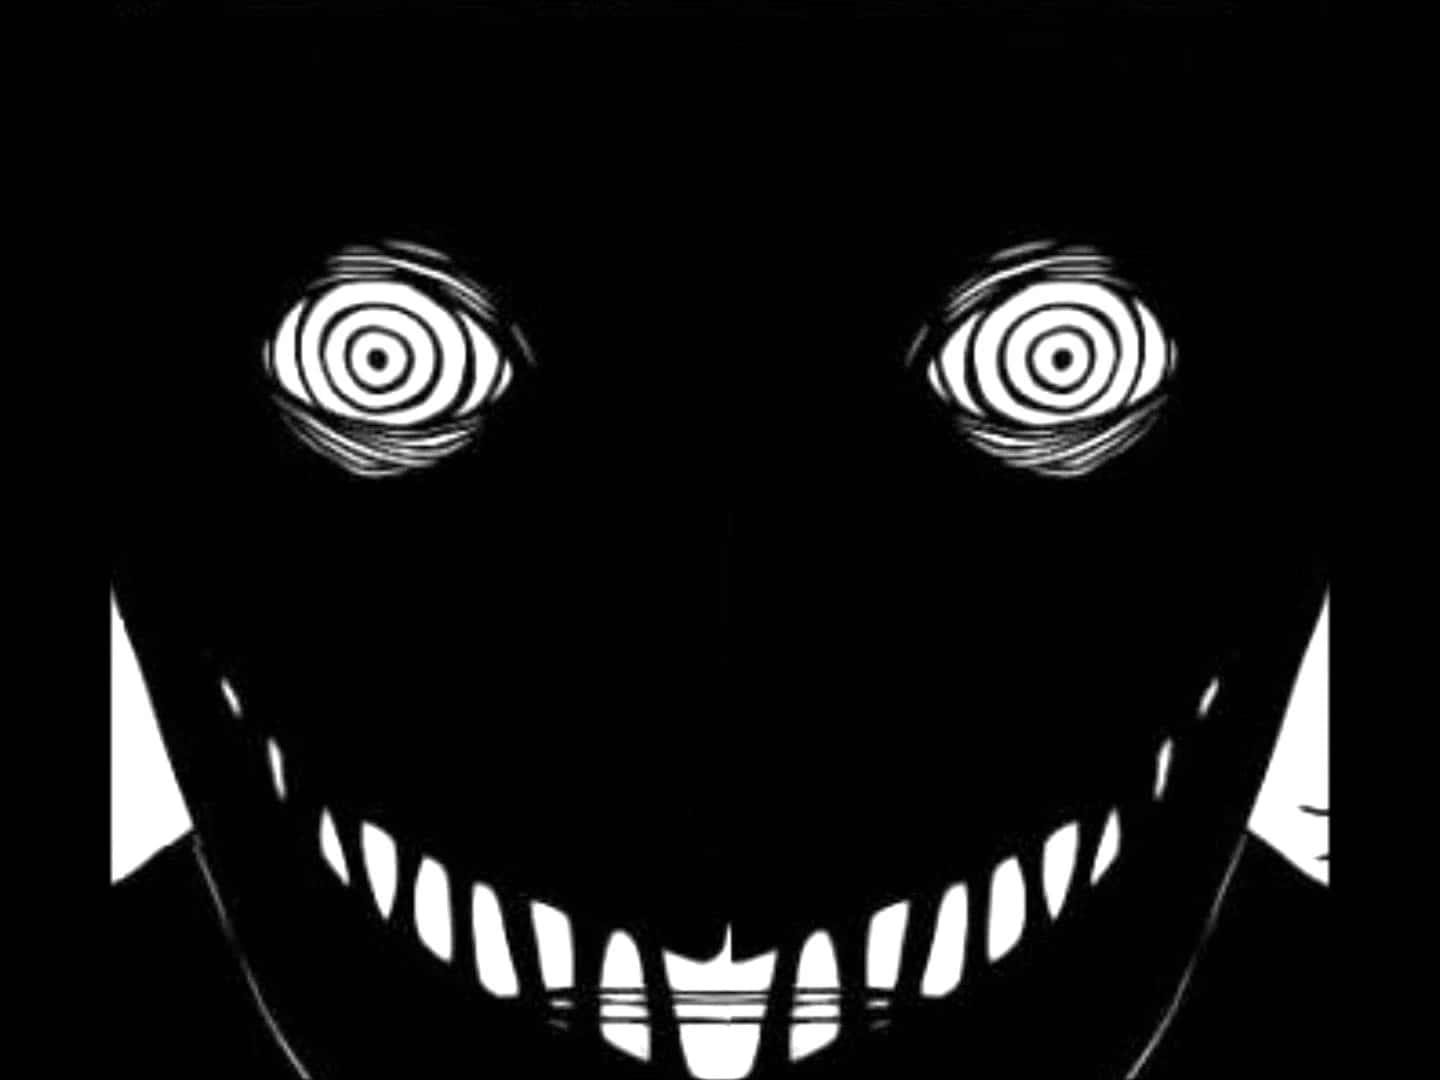 Black Zetsu, the infamous antagonist from the Naruto series Wallpaper